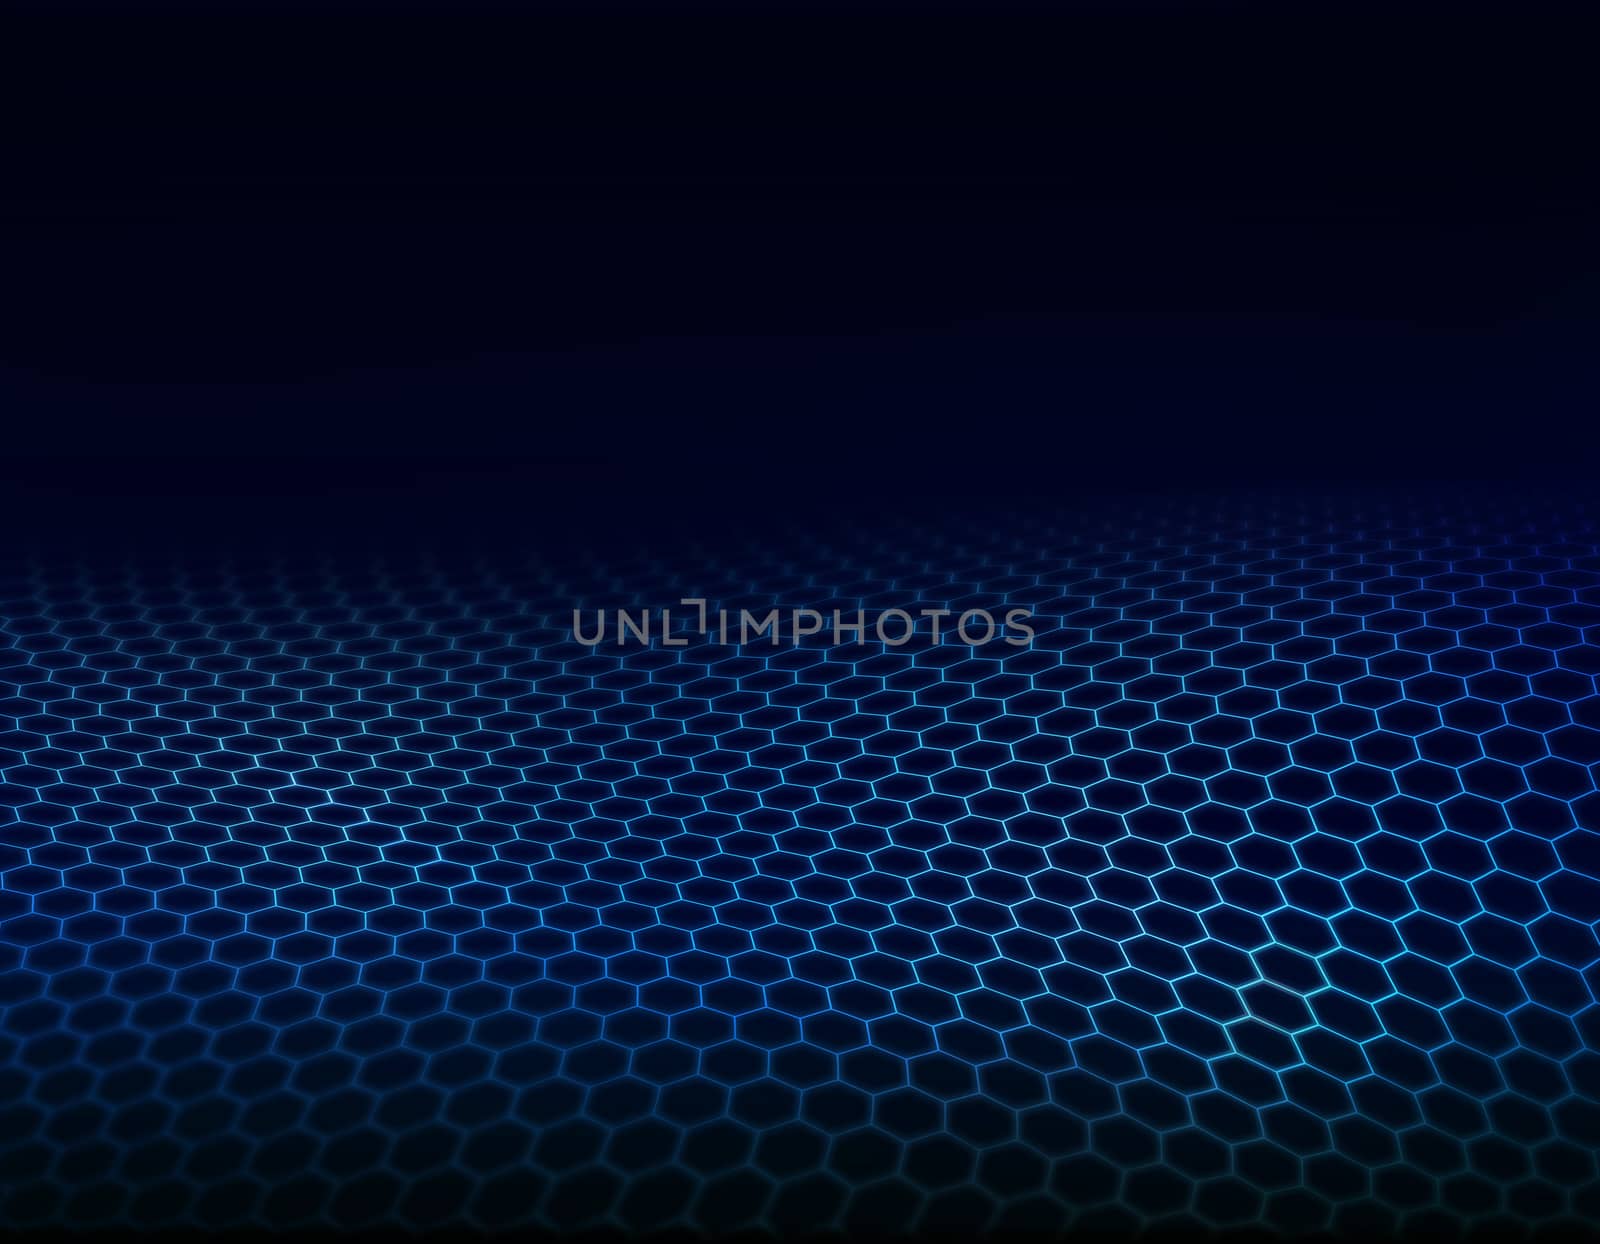 3D futuristic design on dark background. Abstract technology concept with blue wavy hexagonal grid. Space for the copy.